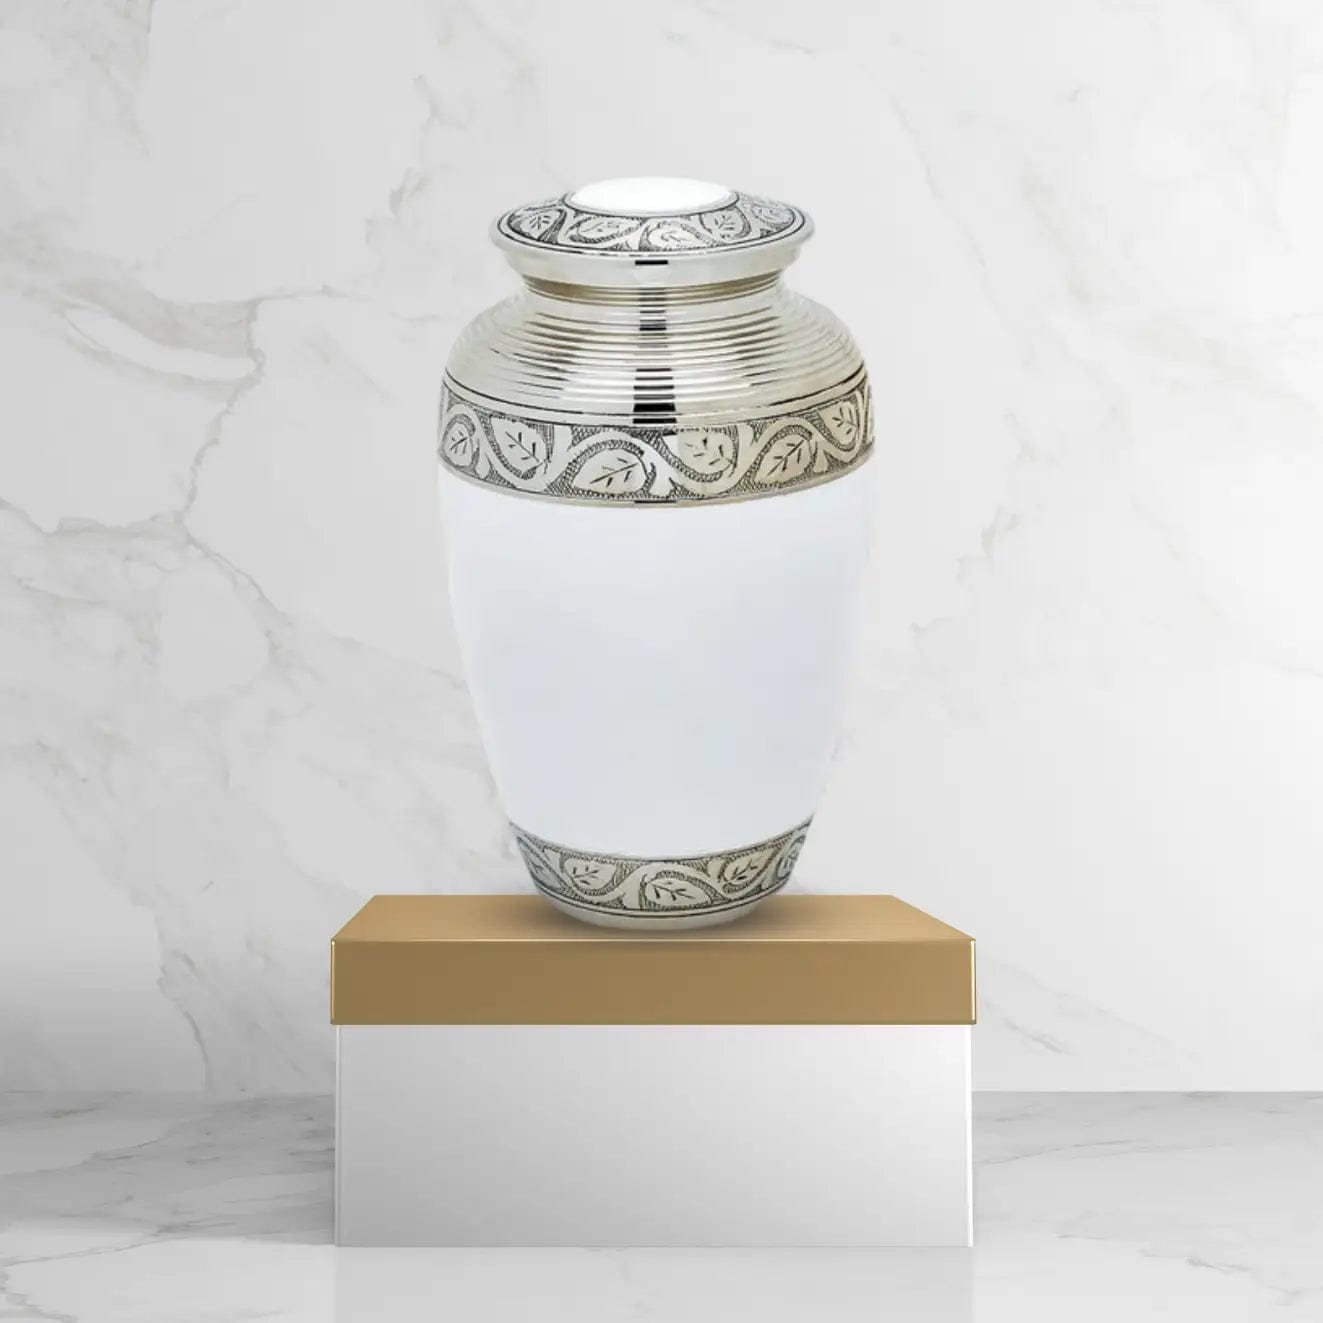 Load image into Gallery viewer, Brass Pet Urn - White
